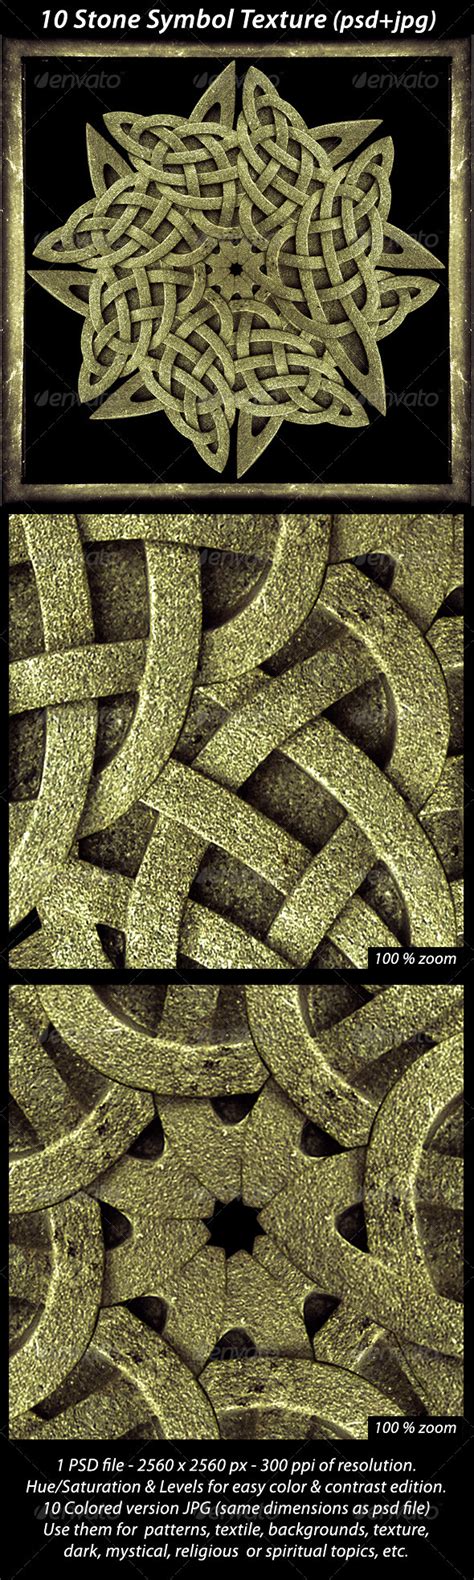 10 Ancient Stone Symbol Texture By Rudimencial Graphicriver